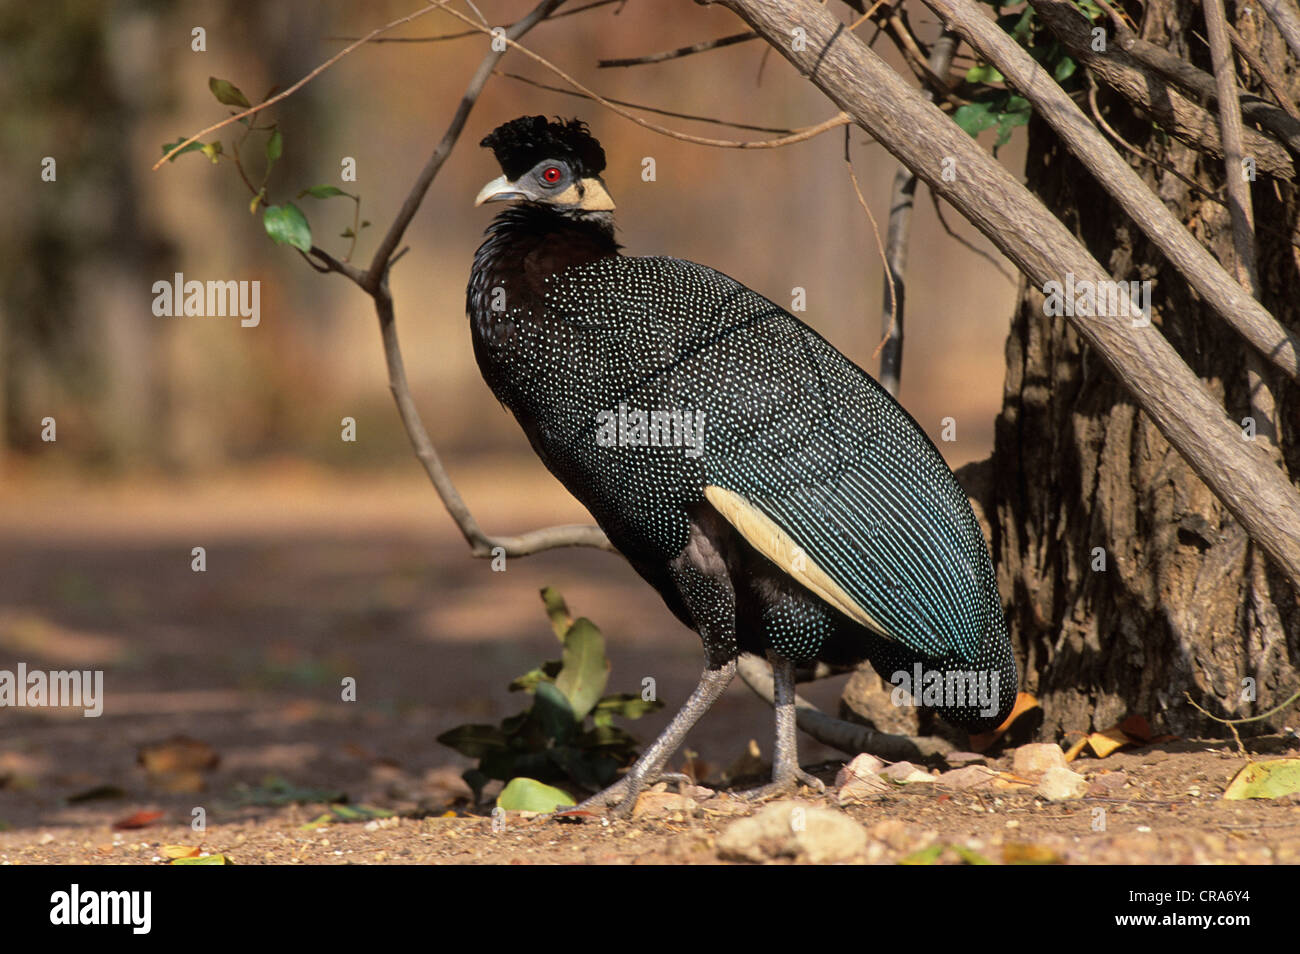 Crested Guineafowl (Guttera pucherani), Kruger National Park, South Africa, Africa Stock Photo